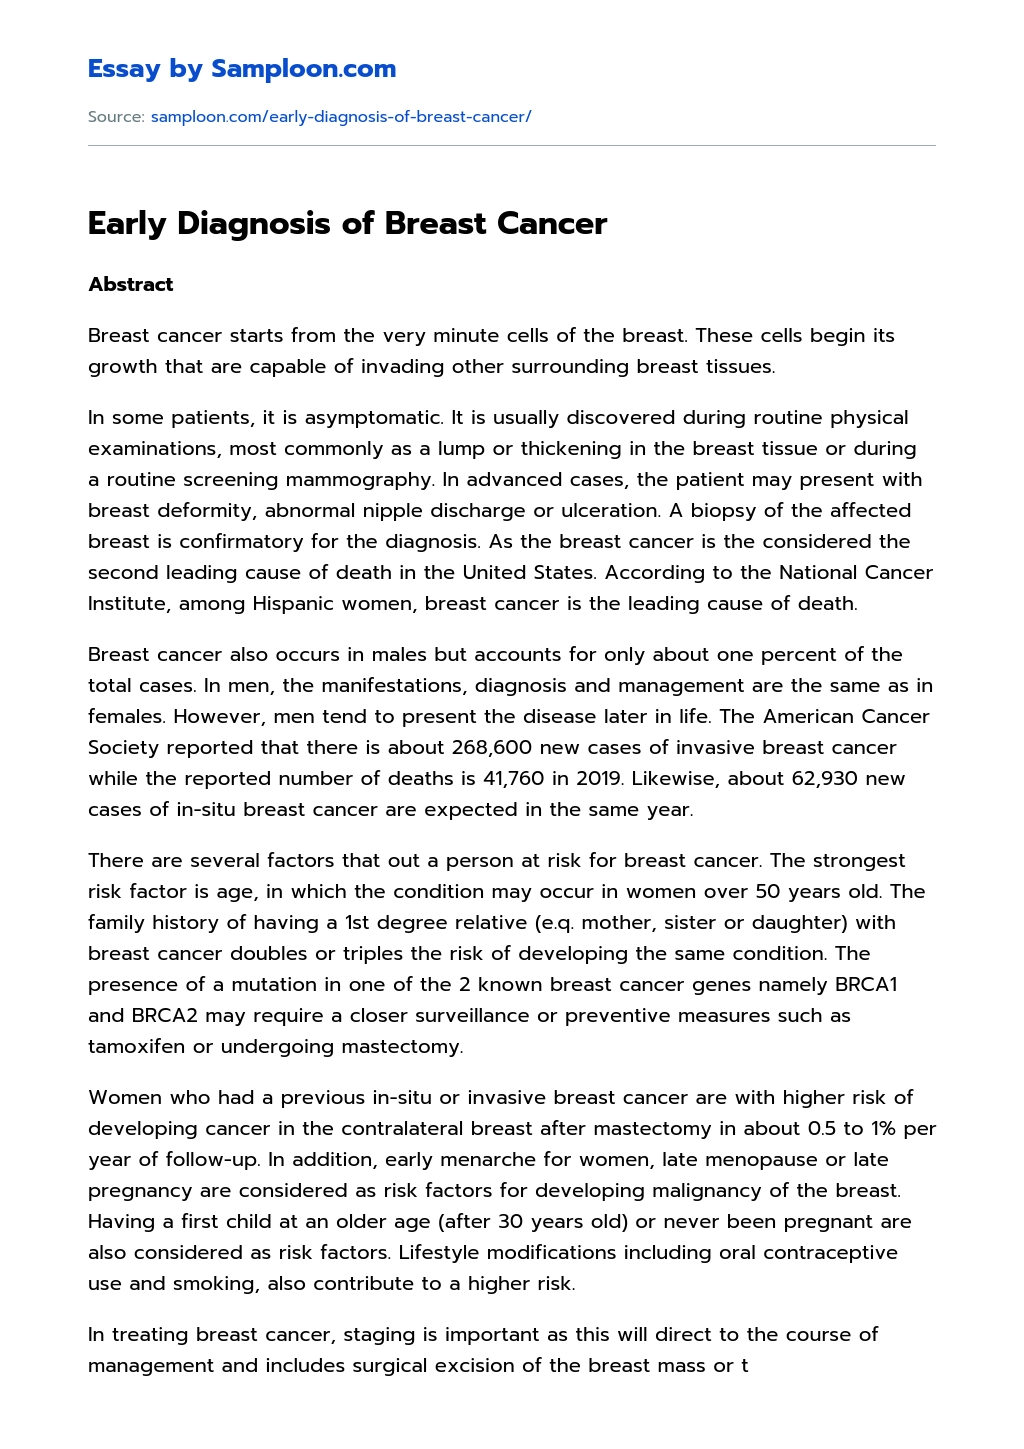 Early Diagnosis of Breast Cancer essay